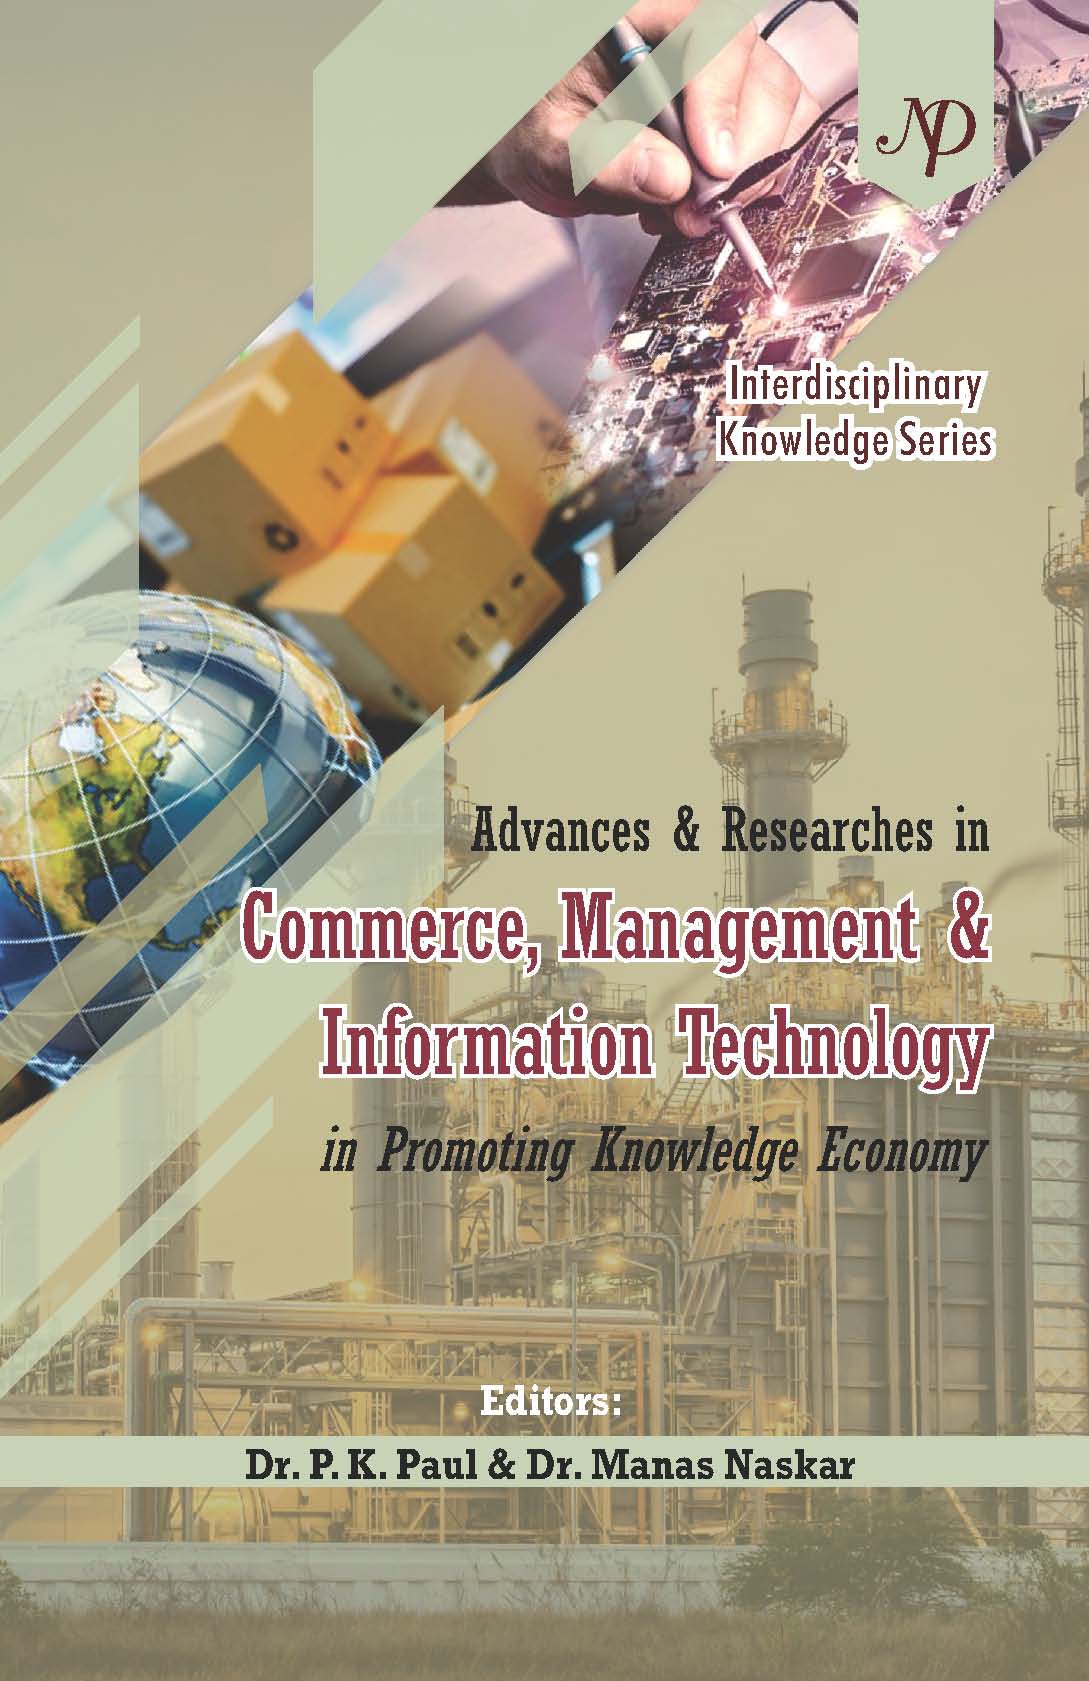 Advances & Researches in Commerce, Management & Information Technology in Promoting Knowledge Economy